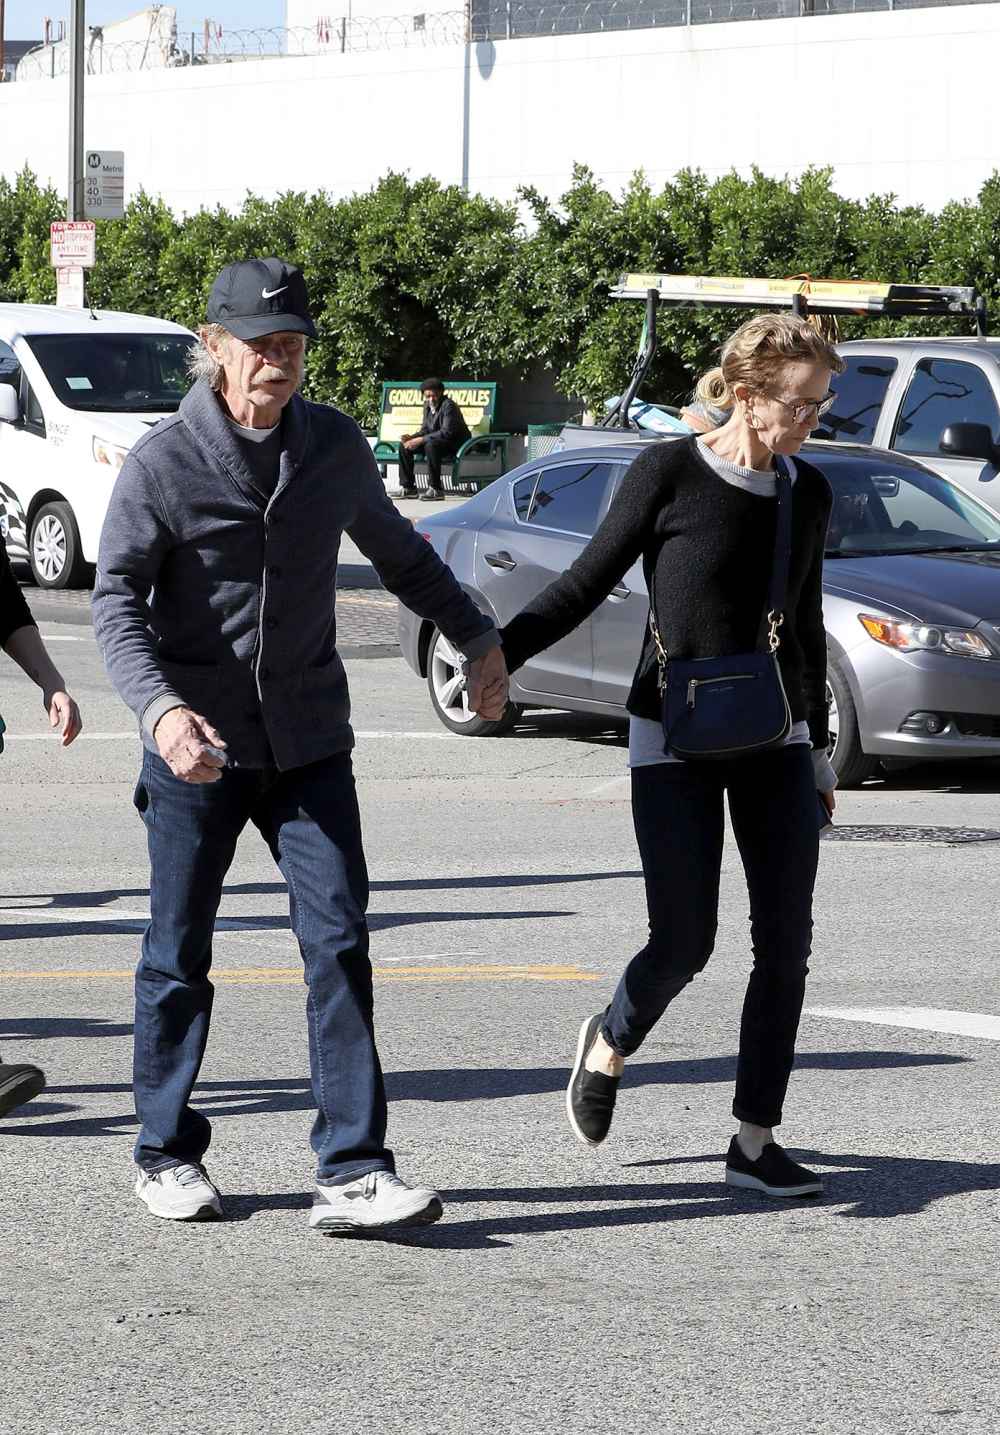 Felicity Huffman, William H. Macy Hold Hands as She Returns to Court